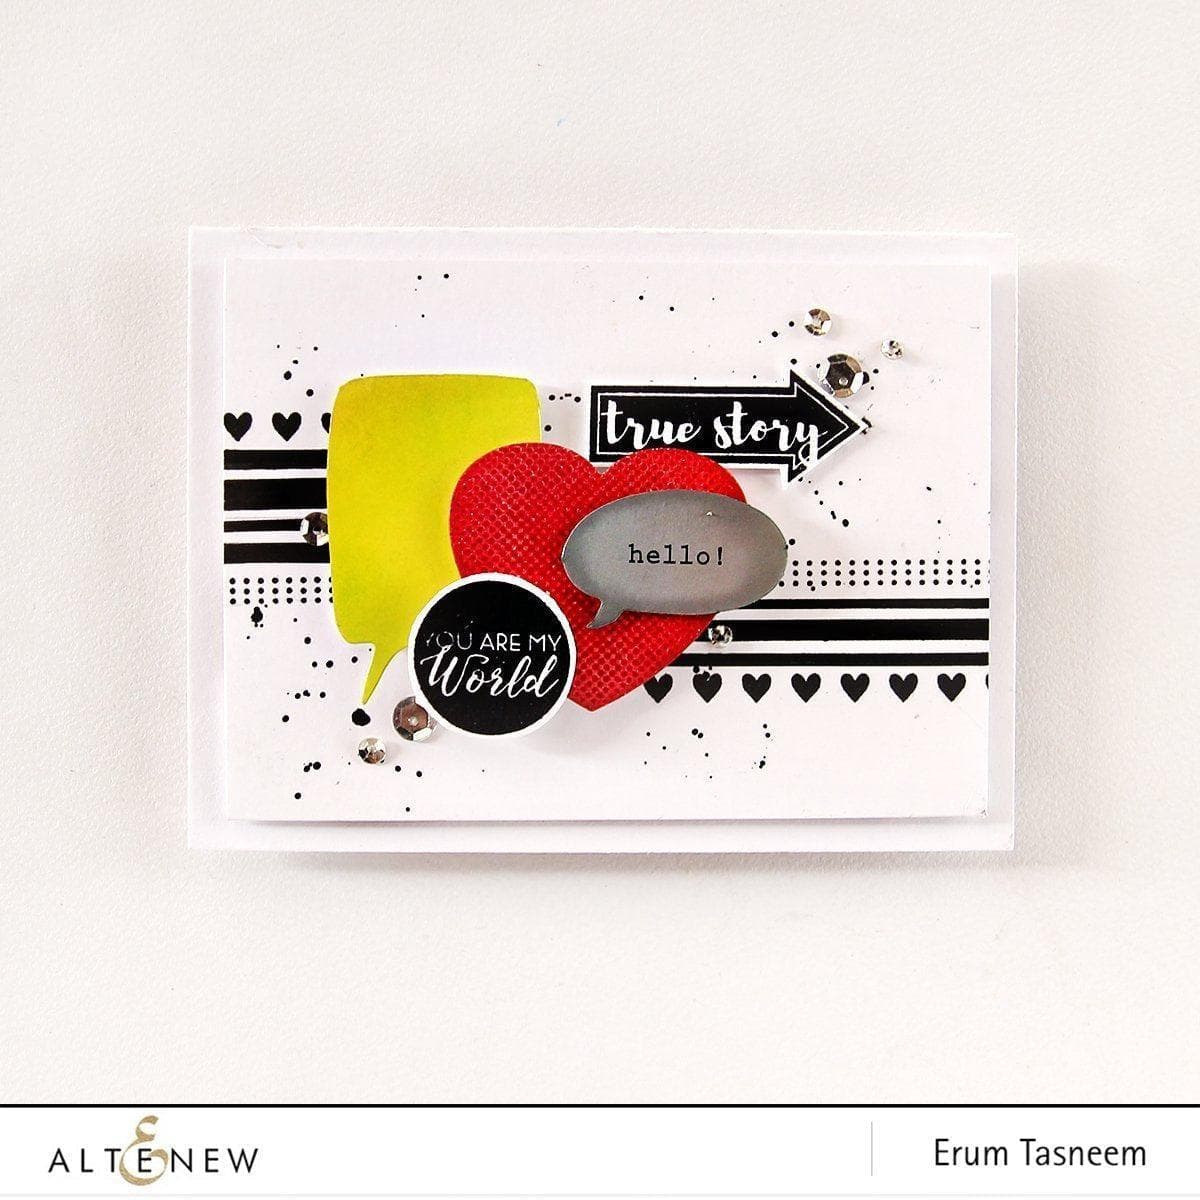 Altenew Creativity Kit Featurette From Die-Cuts to Patterned Backgrounds Class